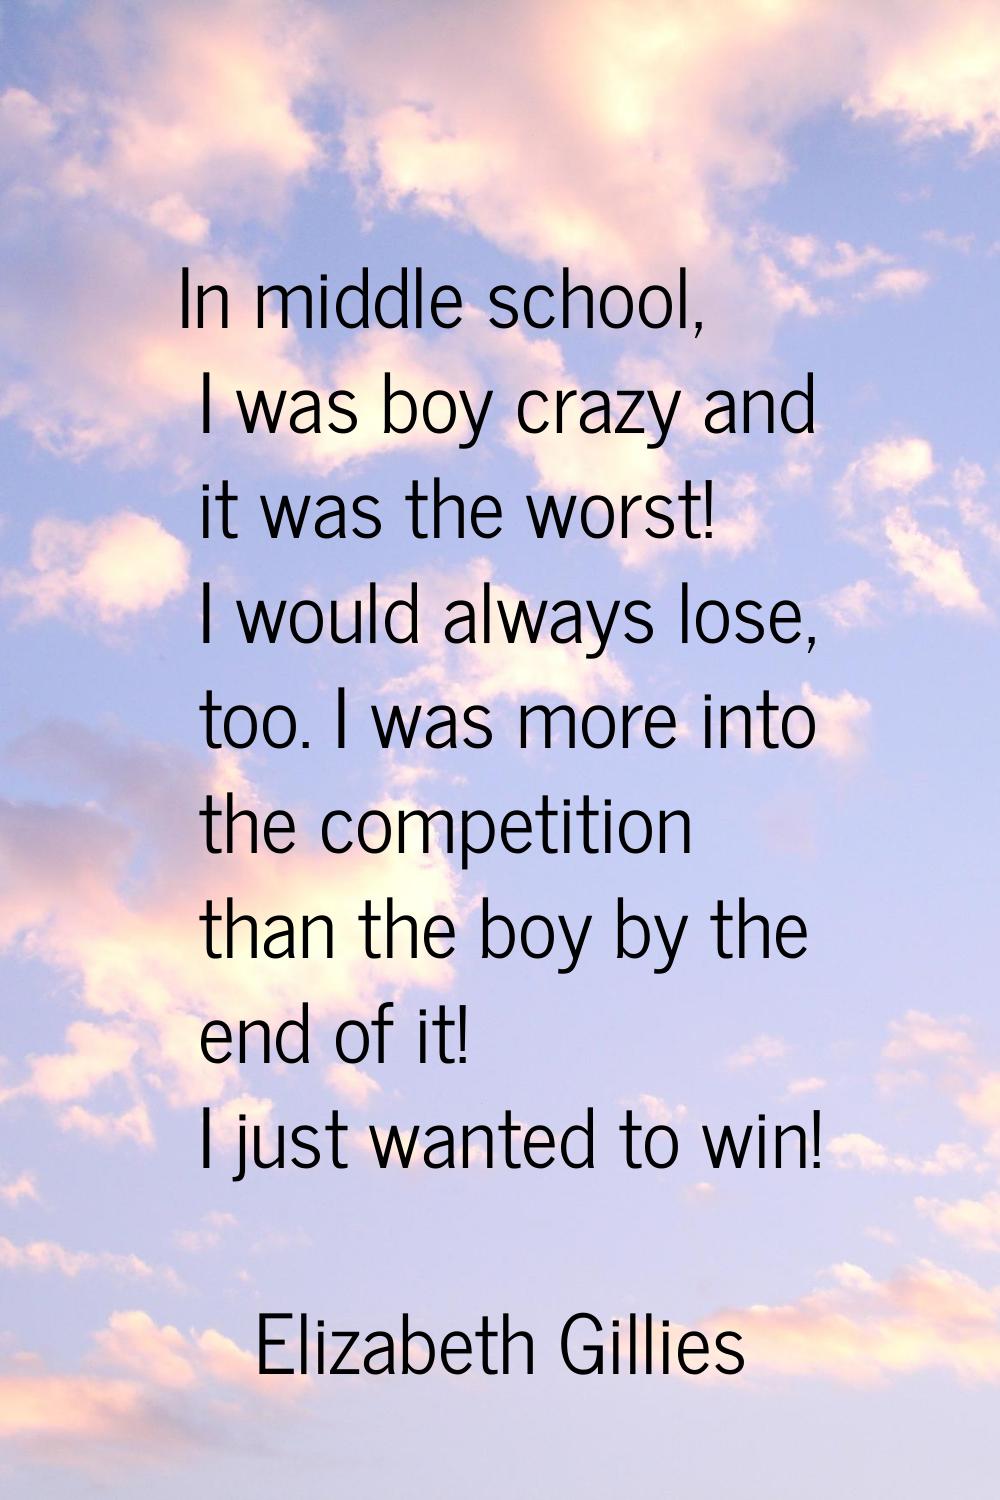 In middle school, I was boy crazy and it was the worst! I would always lose, too. I was more into t